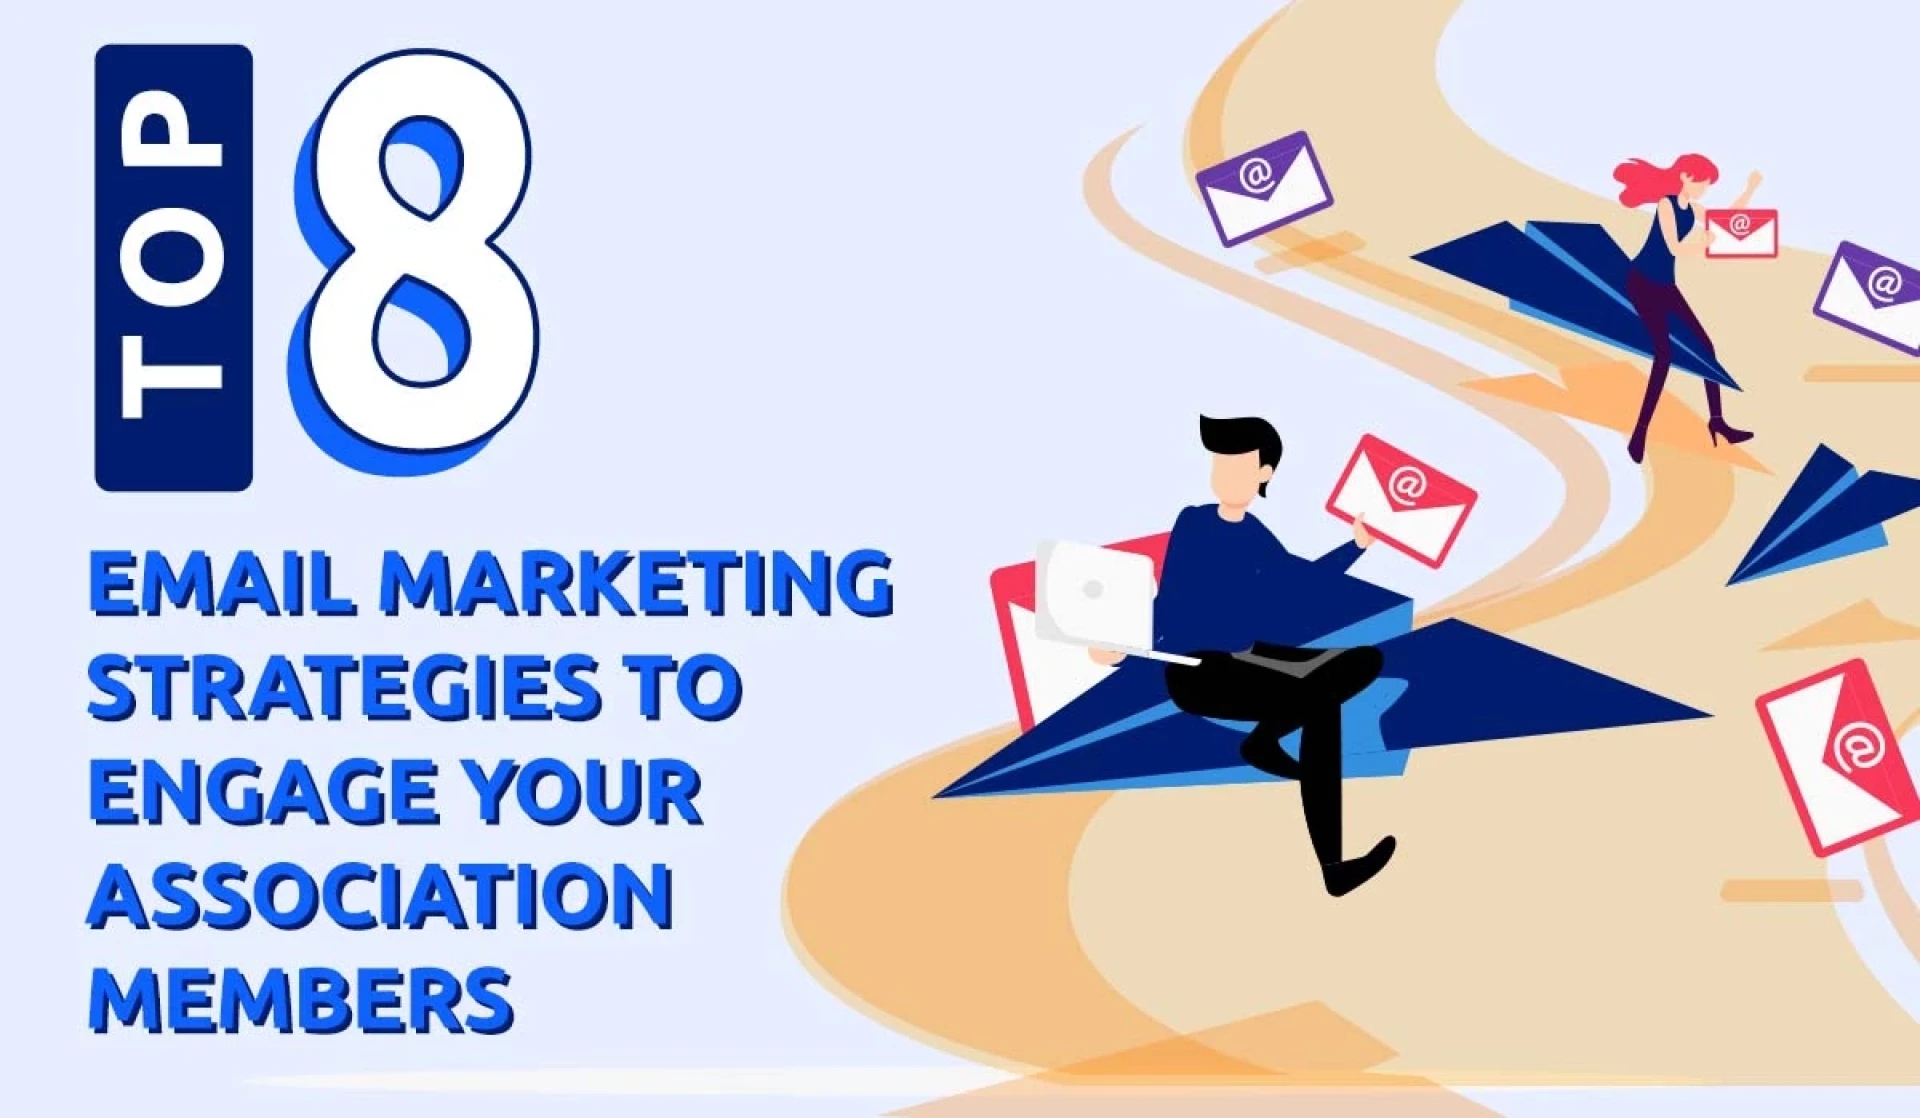 8 Email Marketing Strategies to Engage Association Members